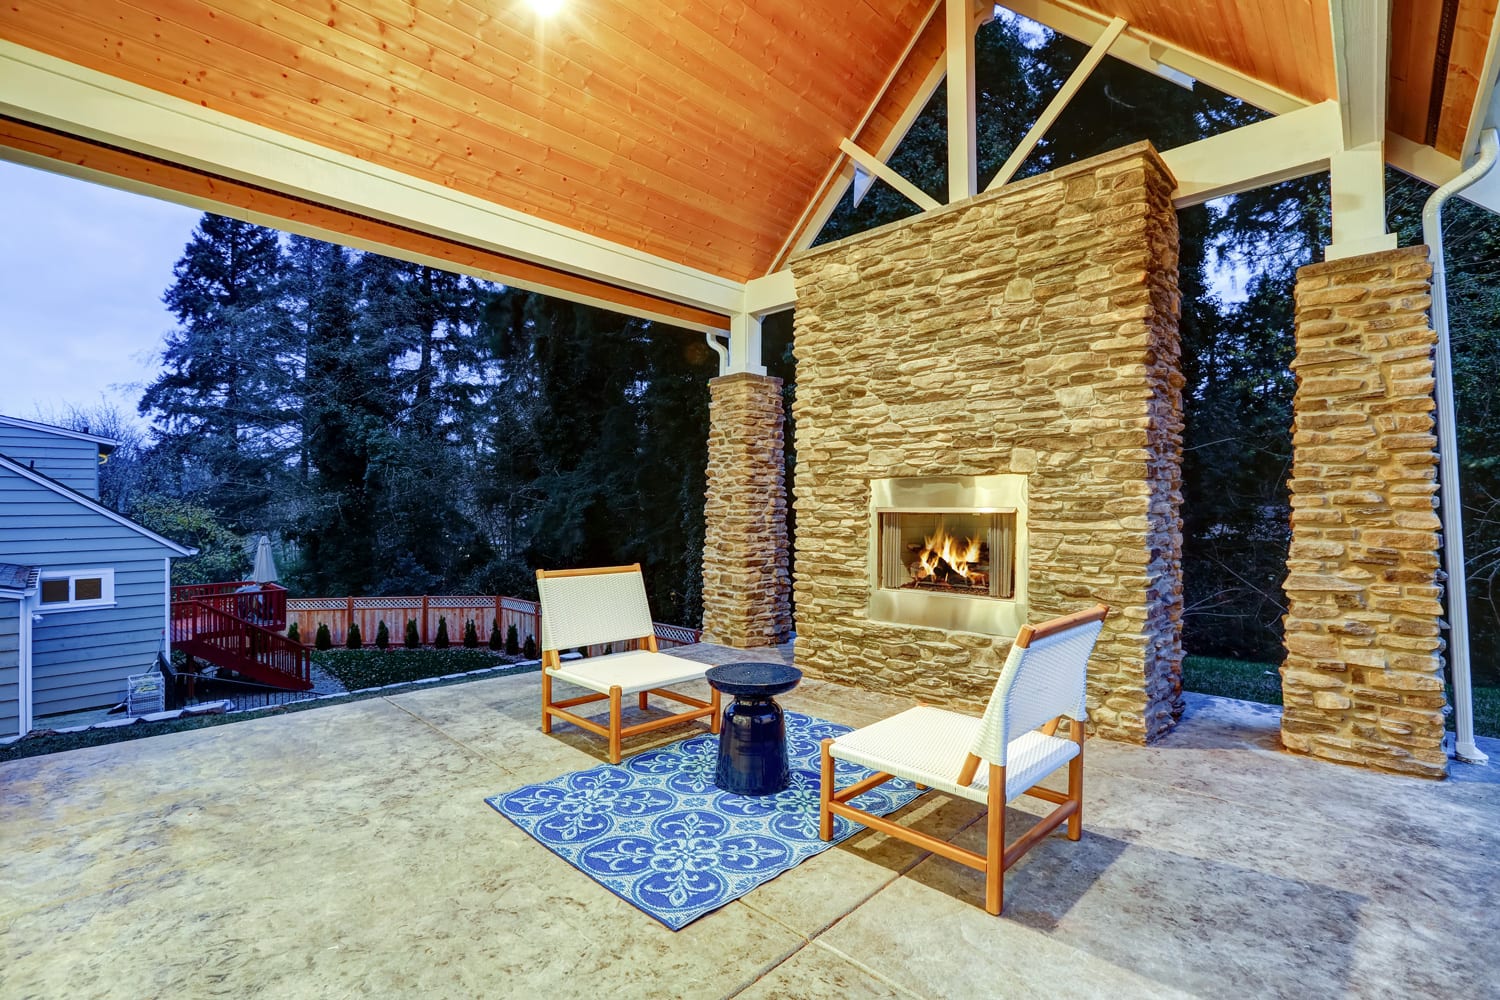 Chic covered back patio with built in gas fireplace, stone pillars, plank vaulted ceiling over cozy teak wood sofa set topped with white cushions and green pillows.